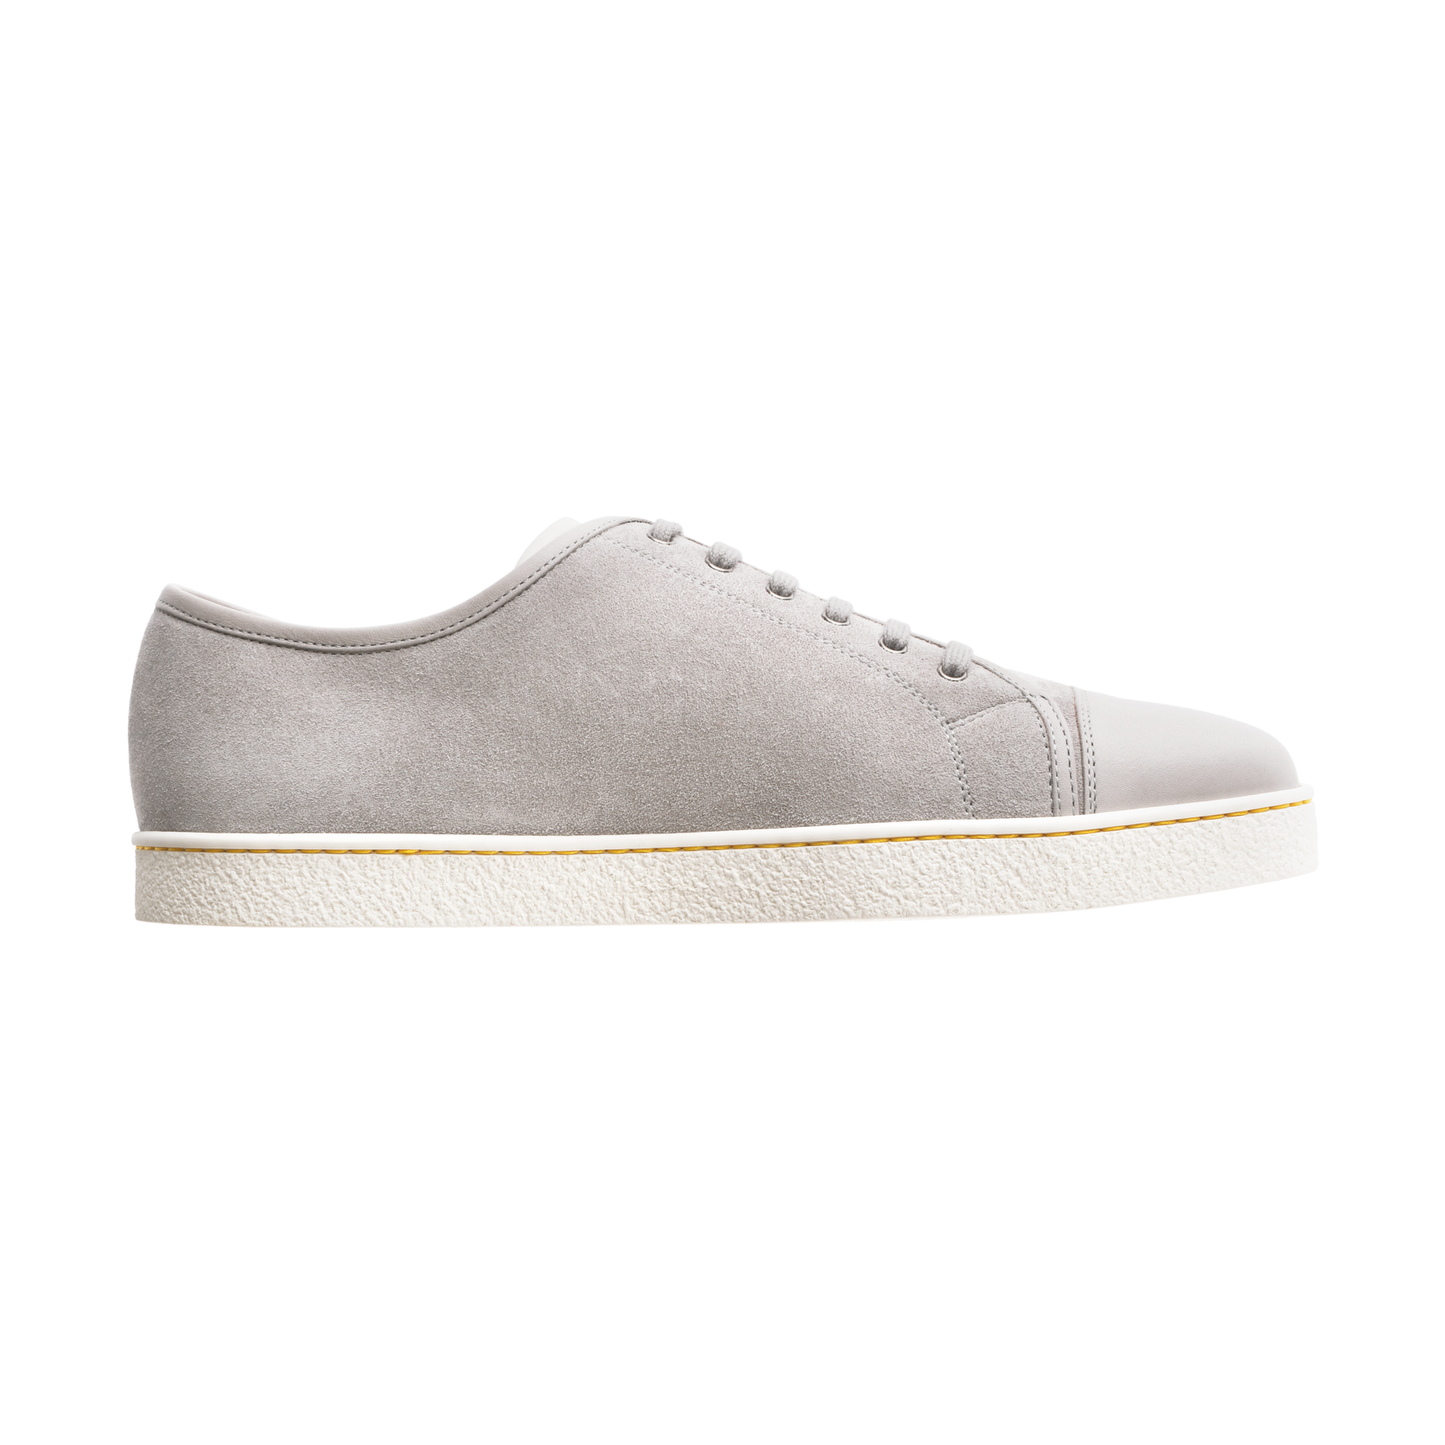 John Lobb "Levah" Suede and Leather Sneakers in Light Grey - SARTALE